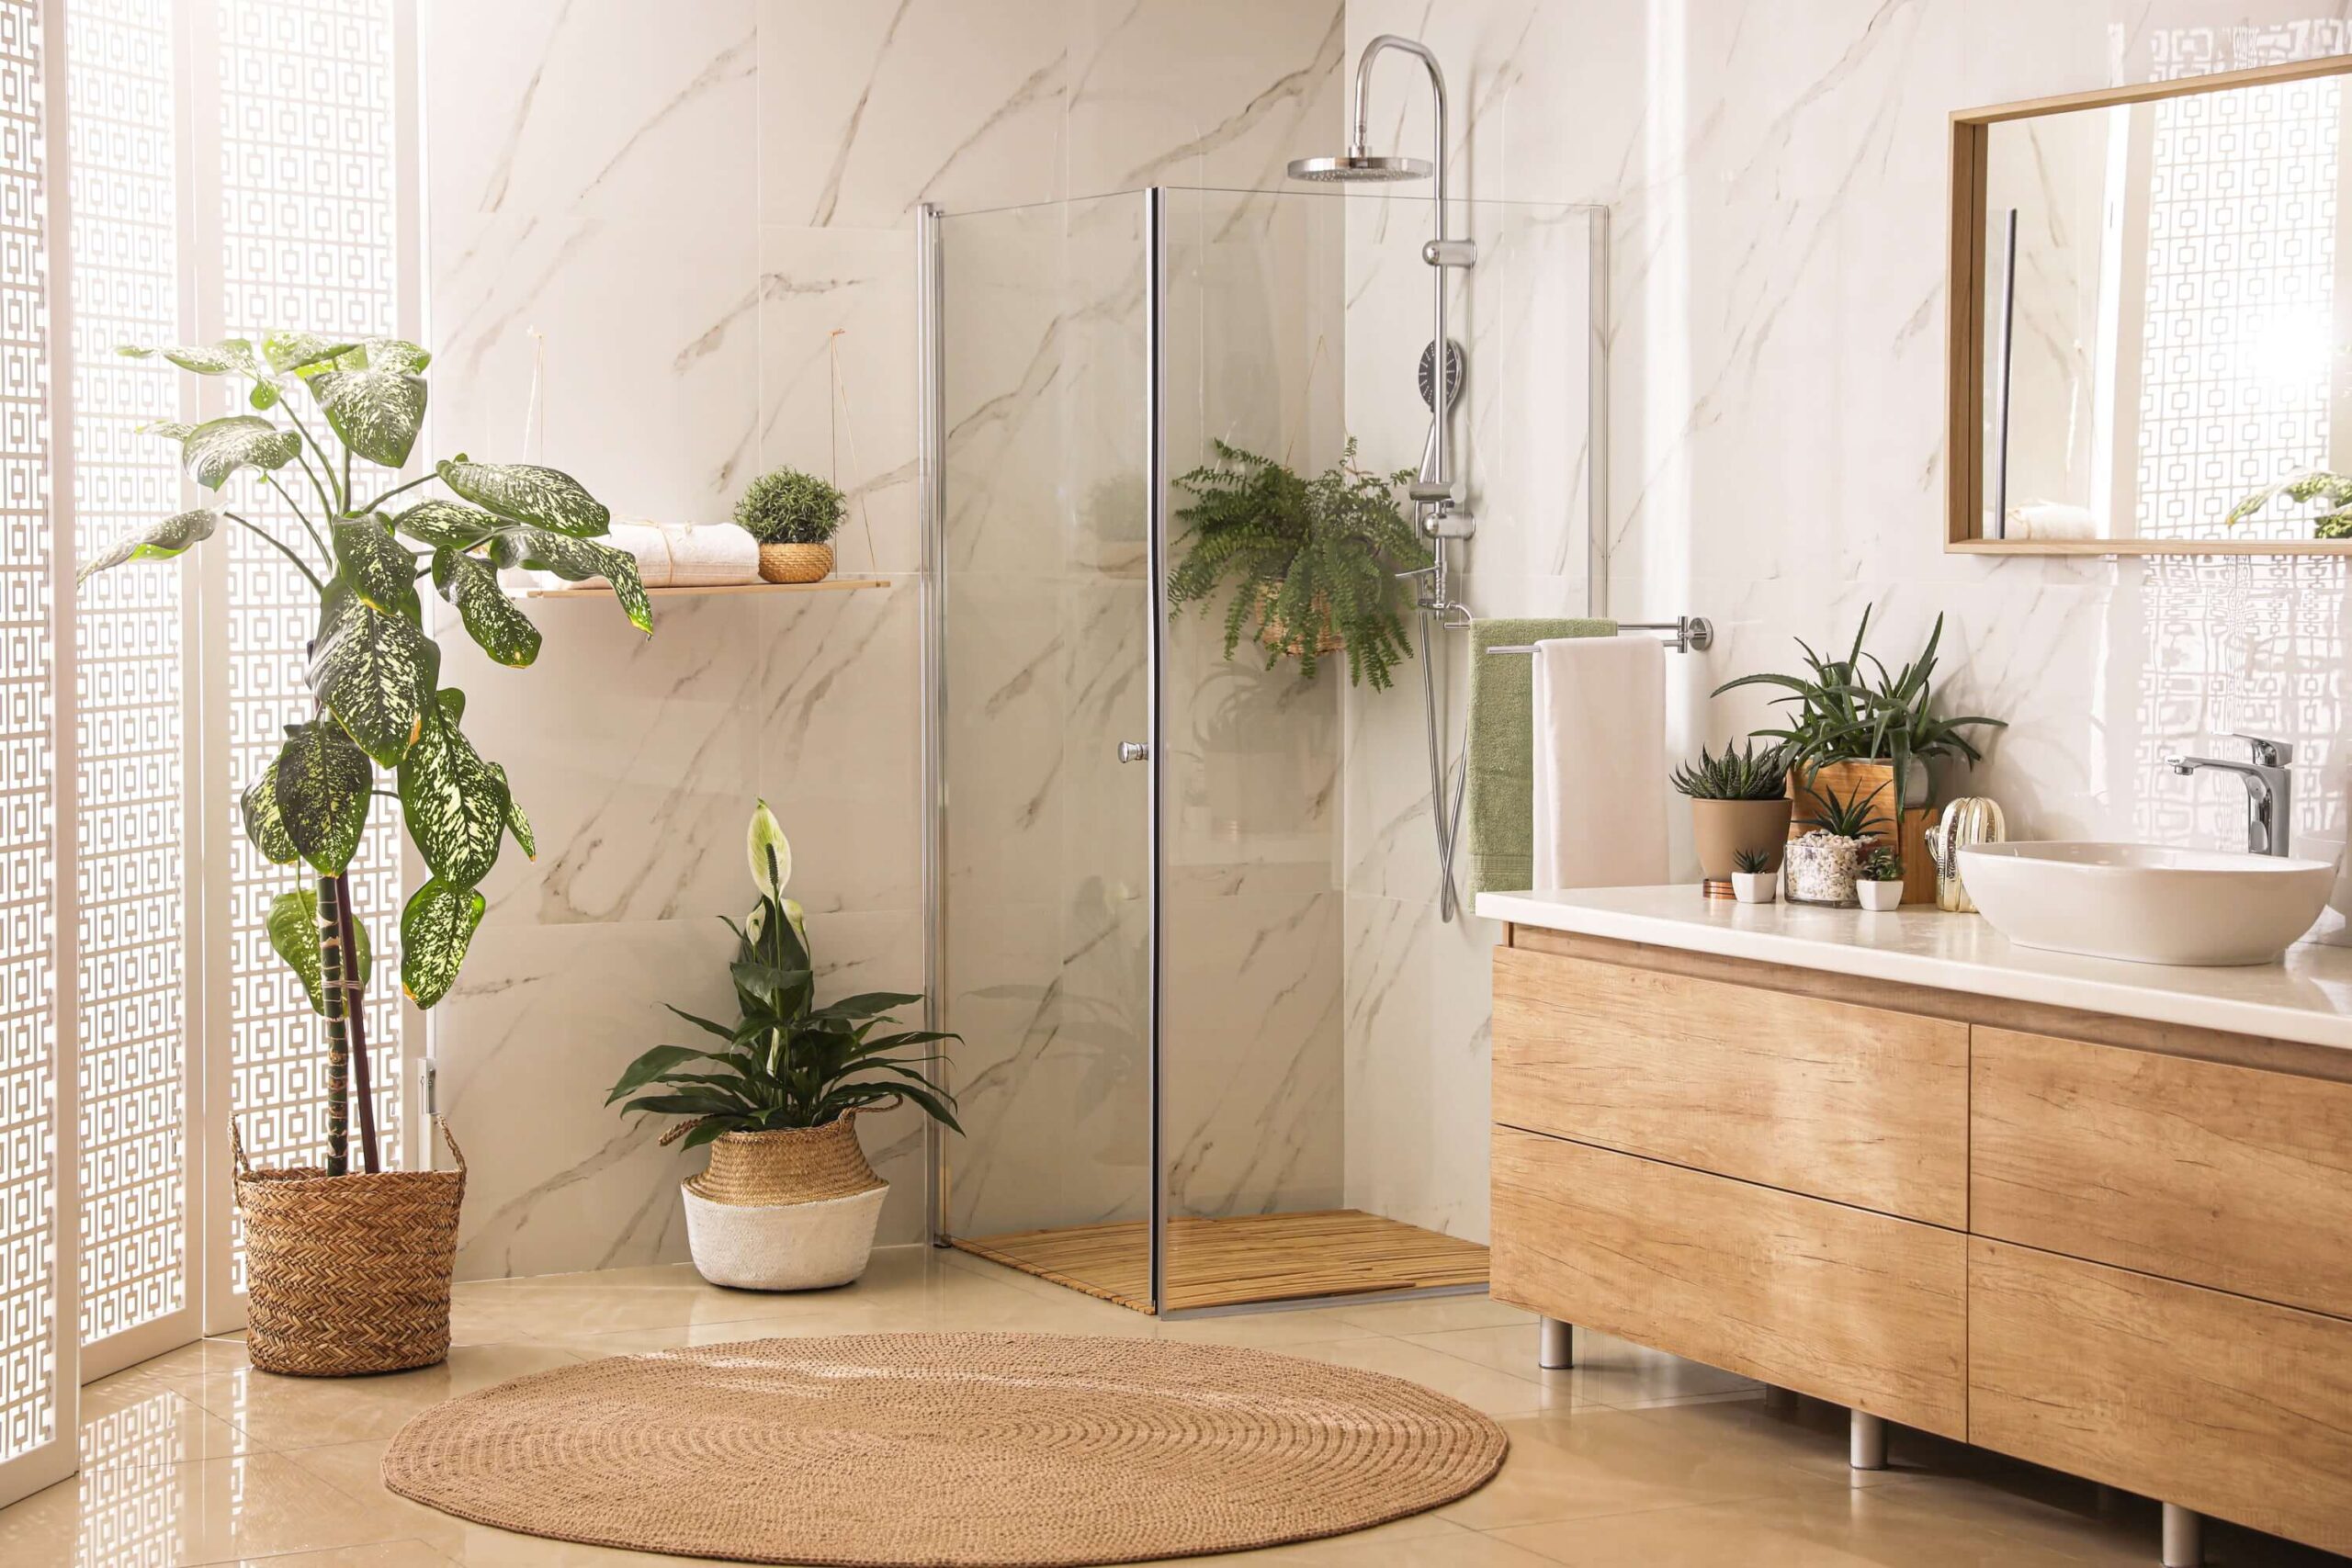 Best Plants For Your Bathroom That Absorb Humidity